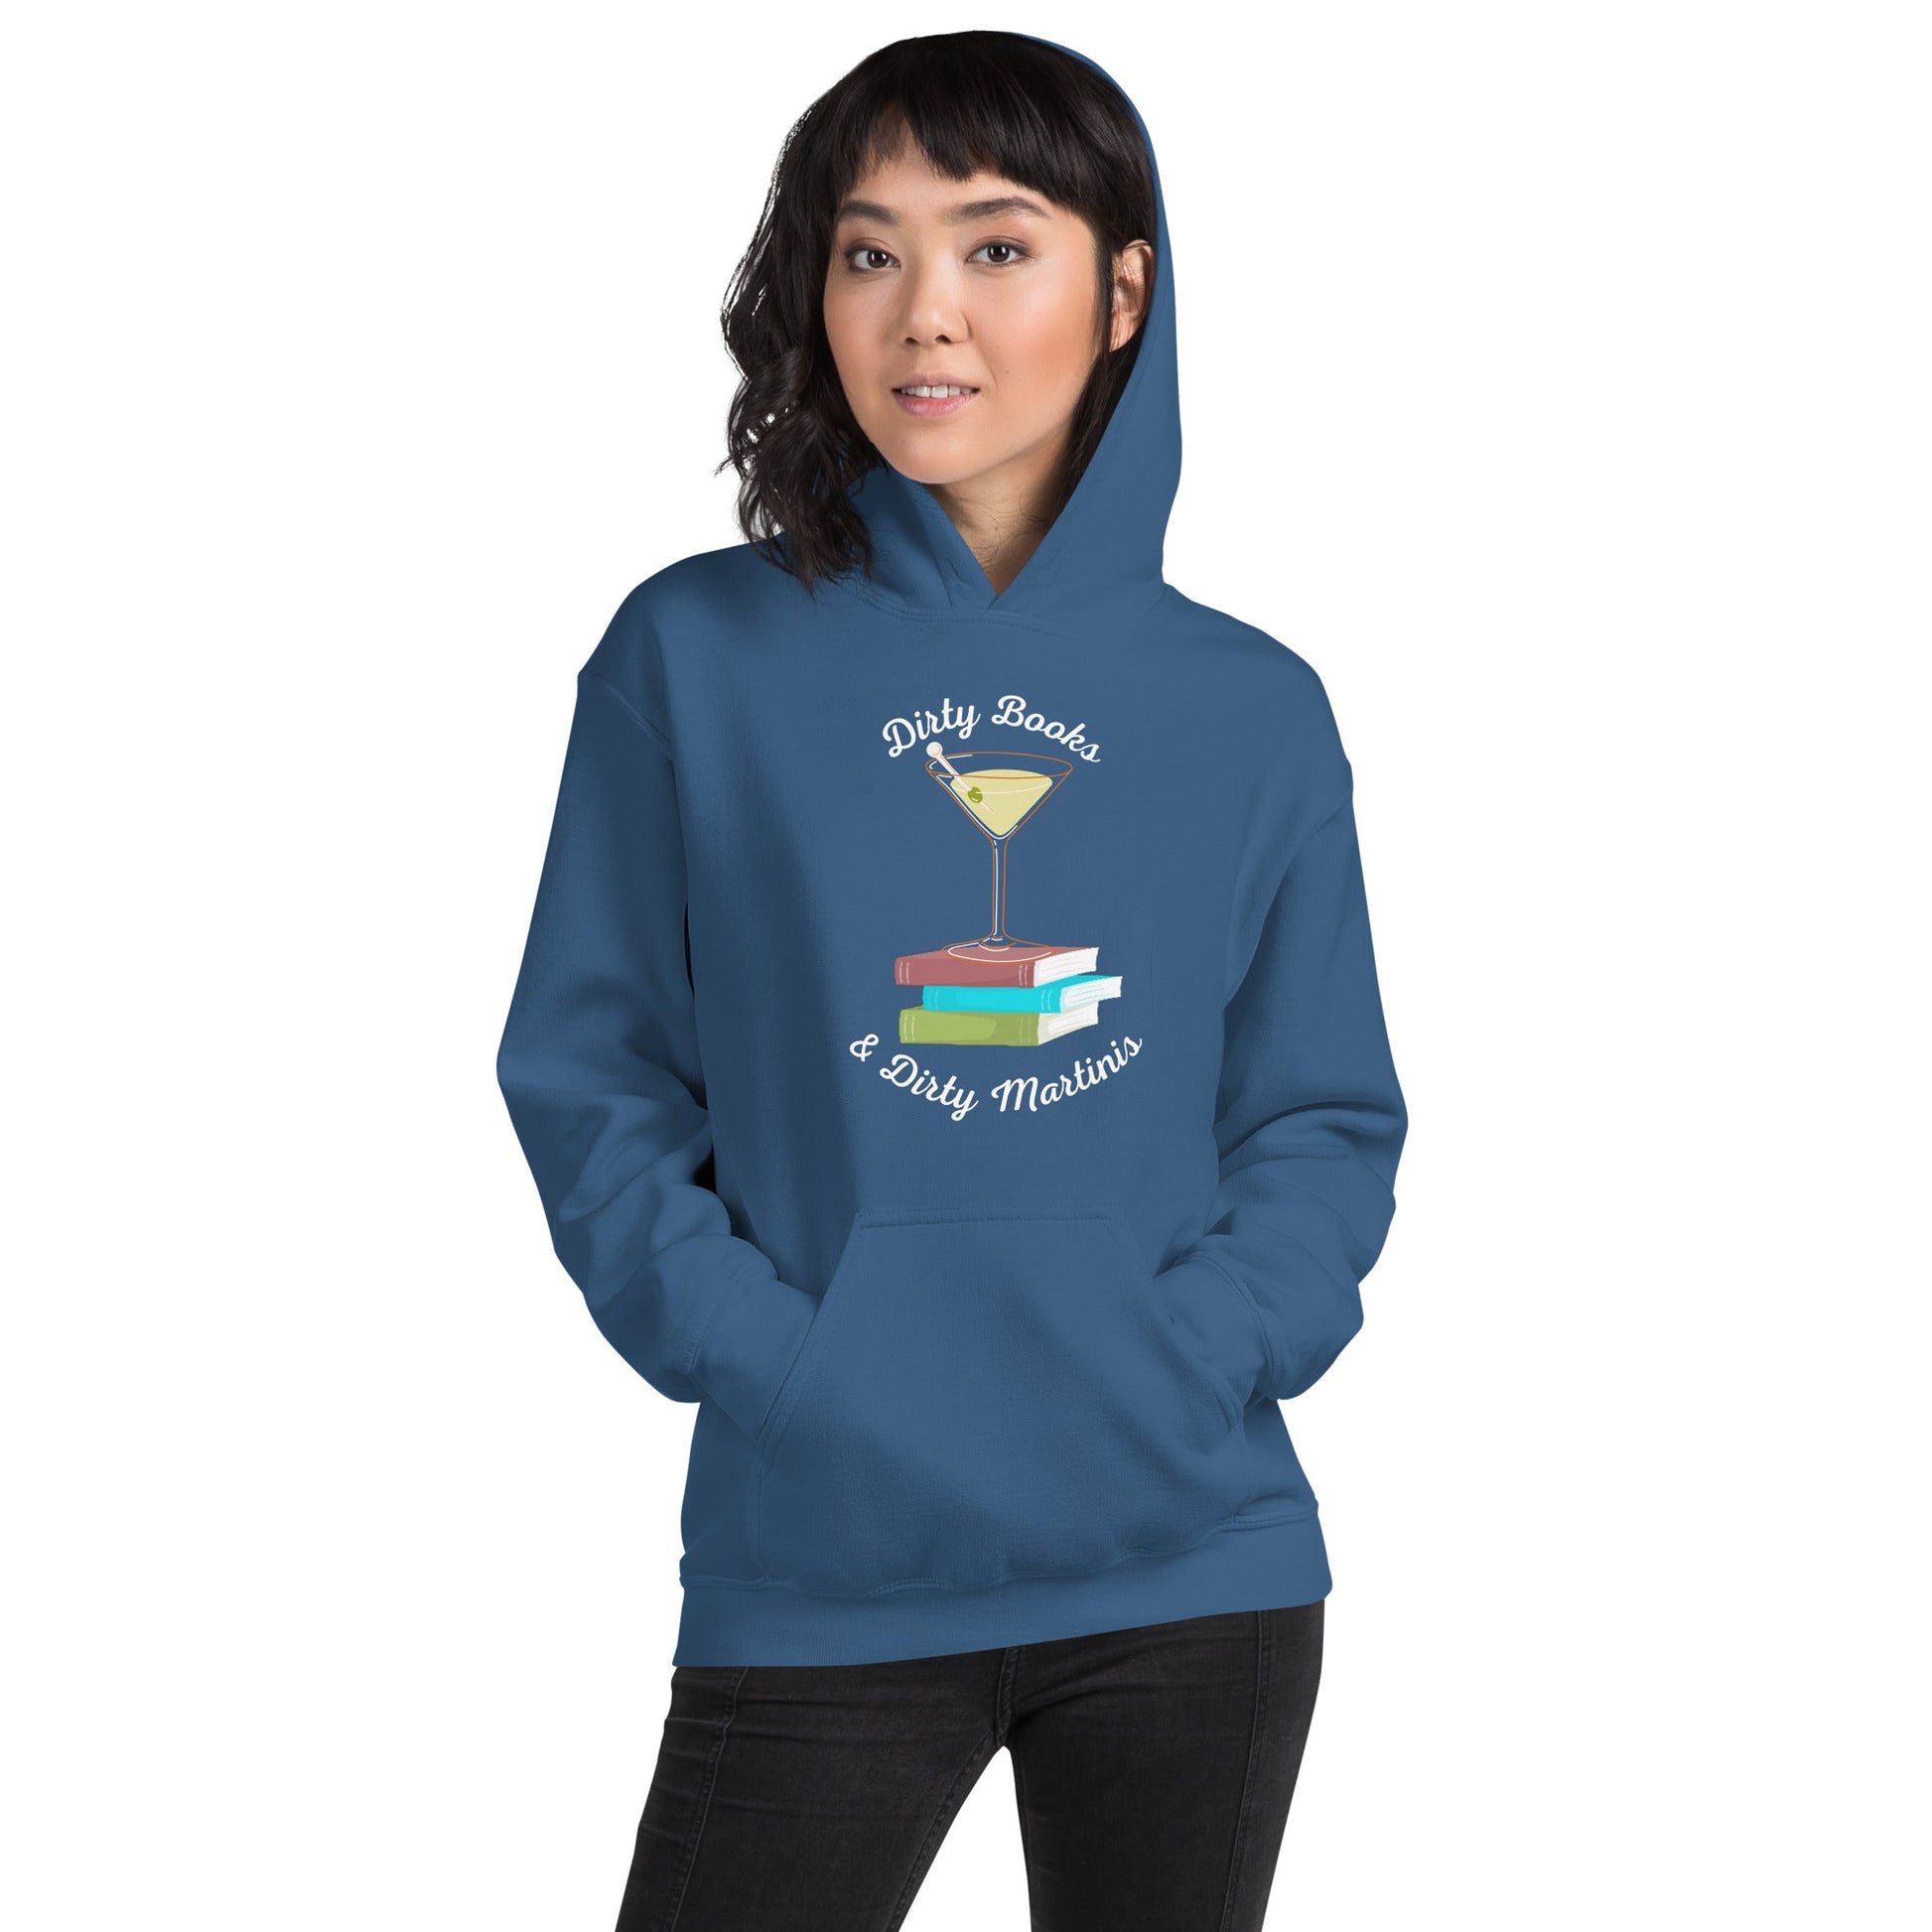 Dirty Books & Dirty Martinis Hoodies - Kindle Crack